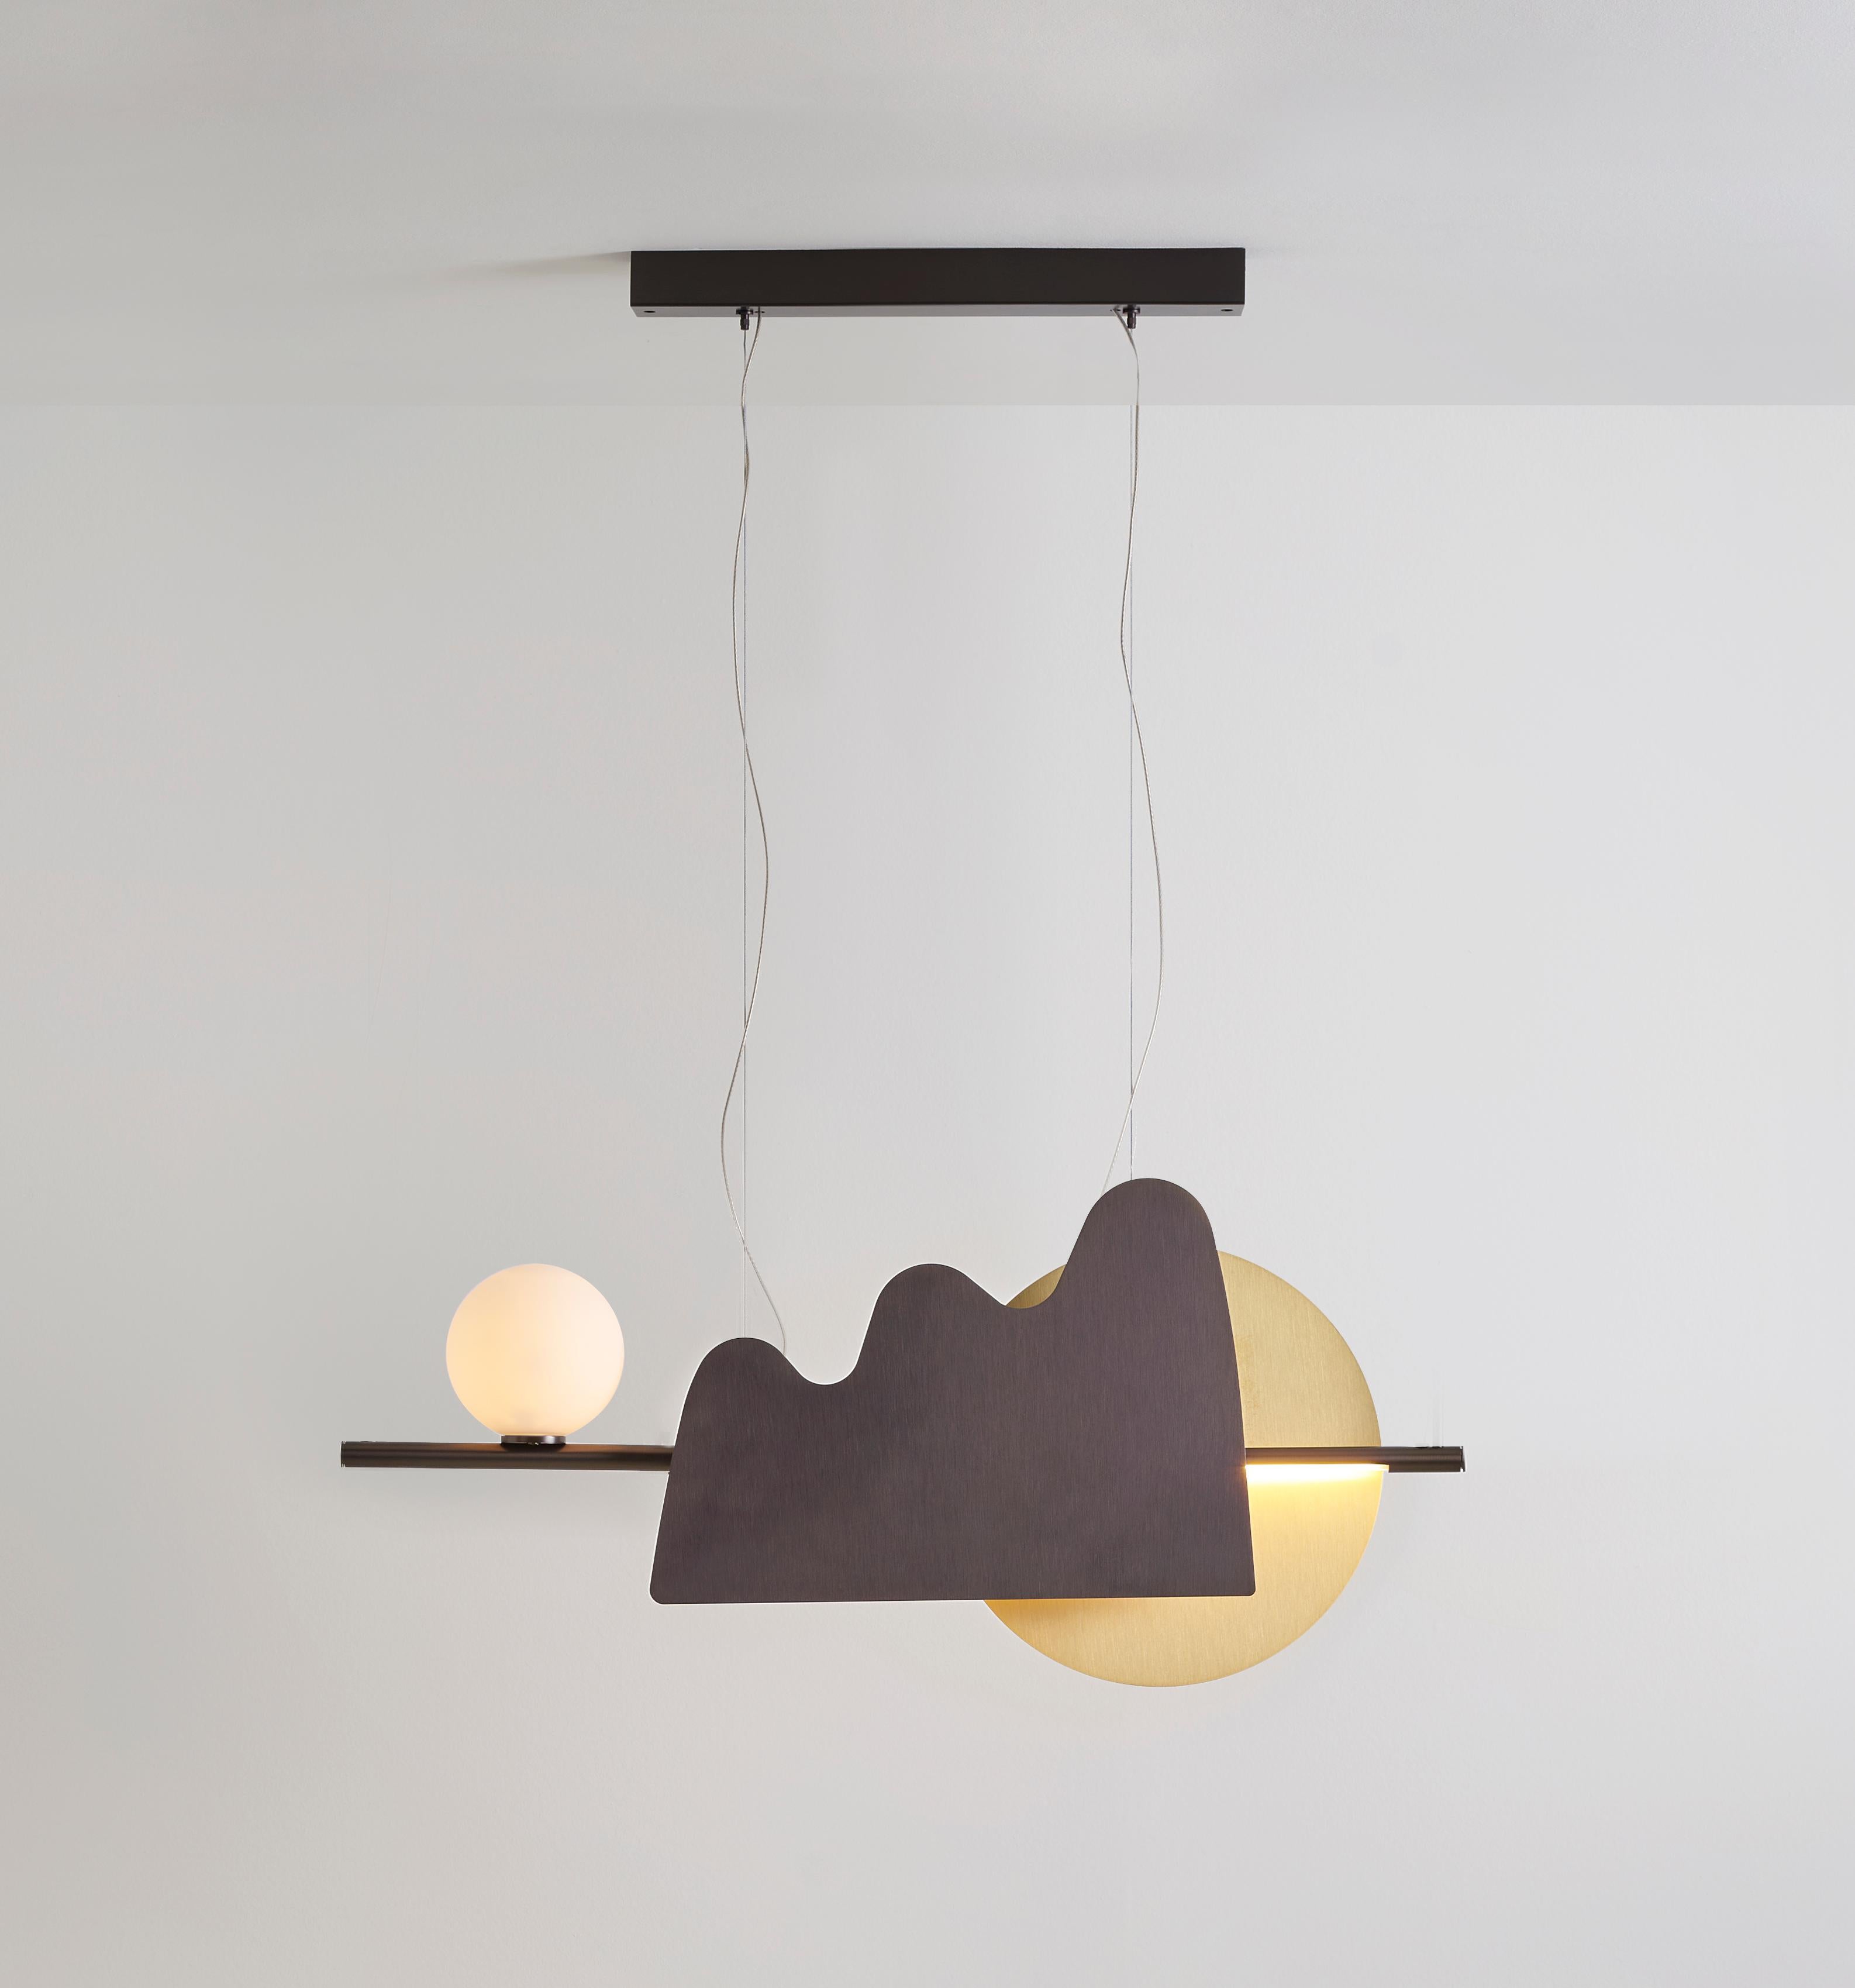 Nacho 750 pendant by Sylvain Willenz
Dimensions: D 12 x W 75 X H 35 cm
Materials: Solid Brass, Polycarbonate, Opal Glass
Others finishes and dimensions are available. The height of the cables can be adjusted during installation

All our lamps